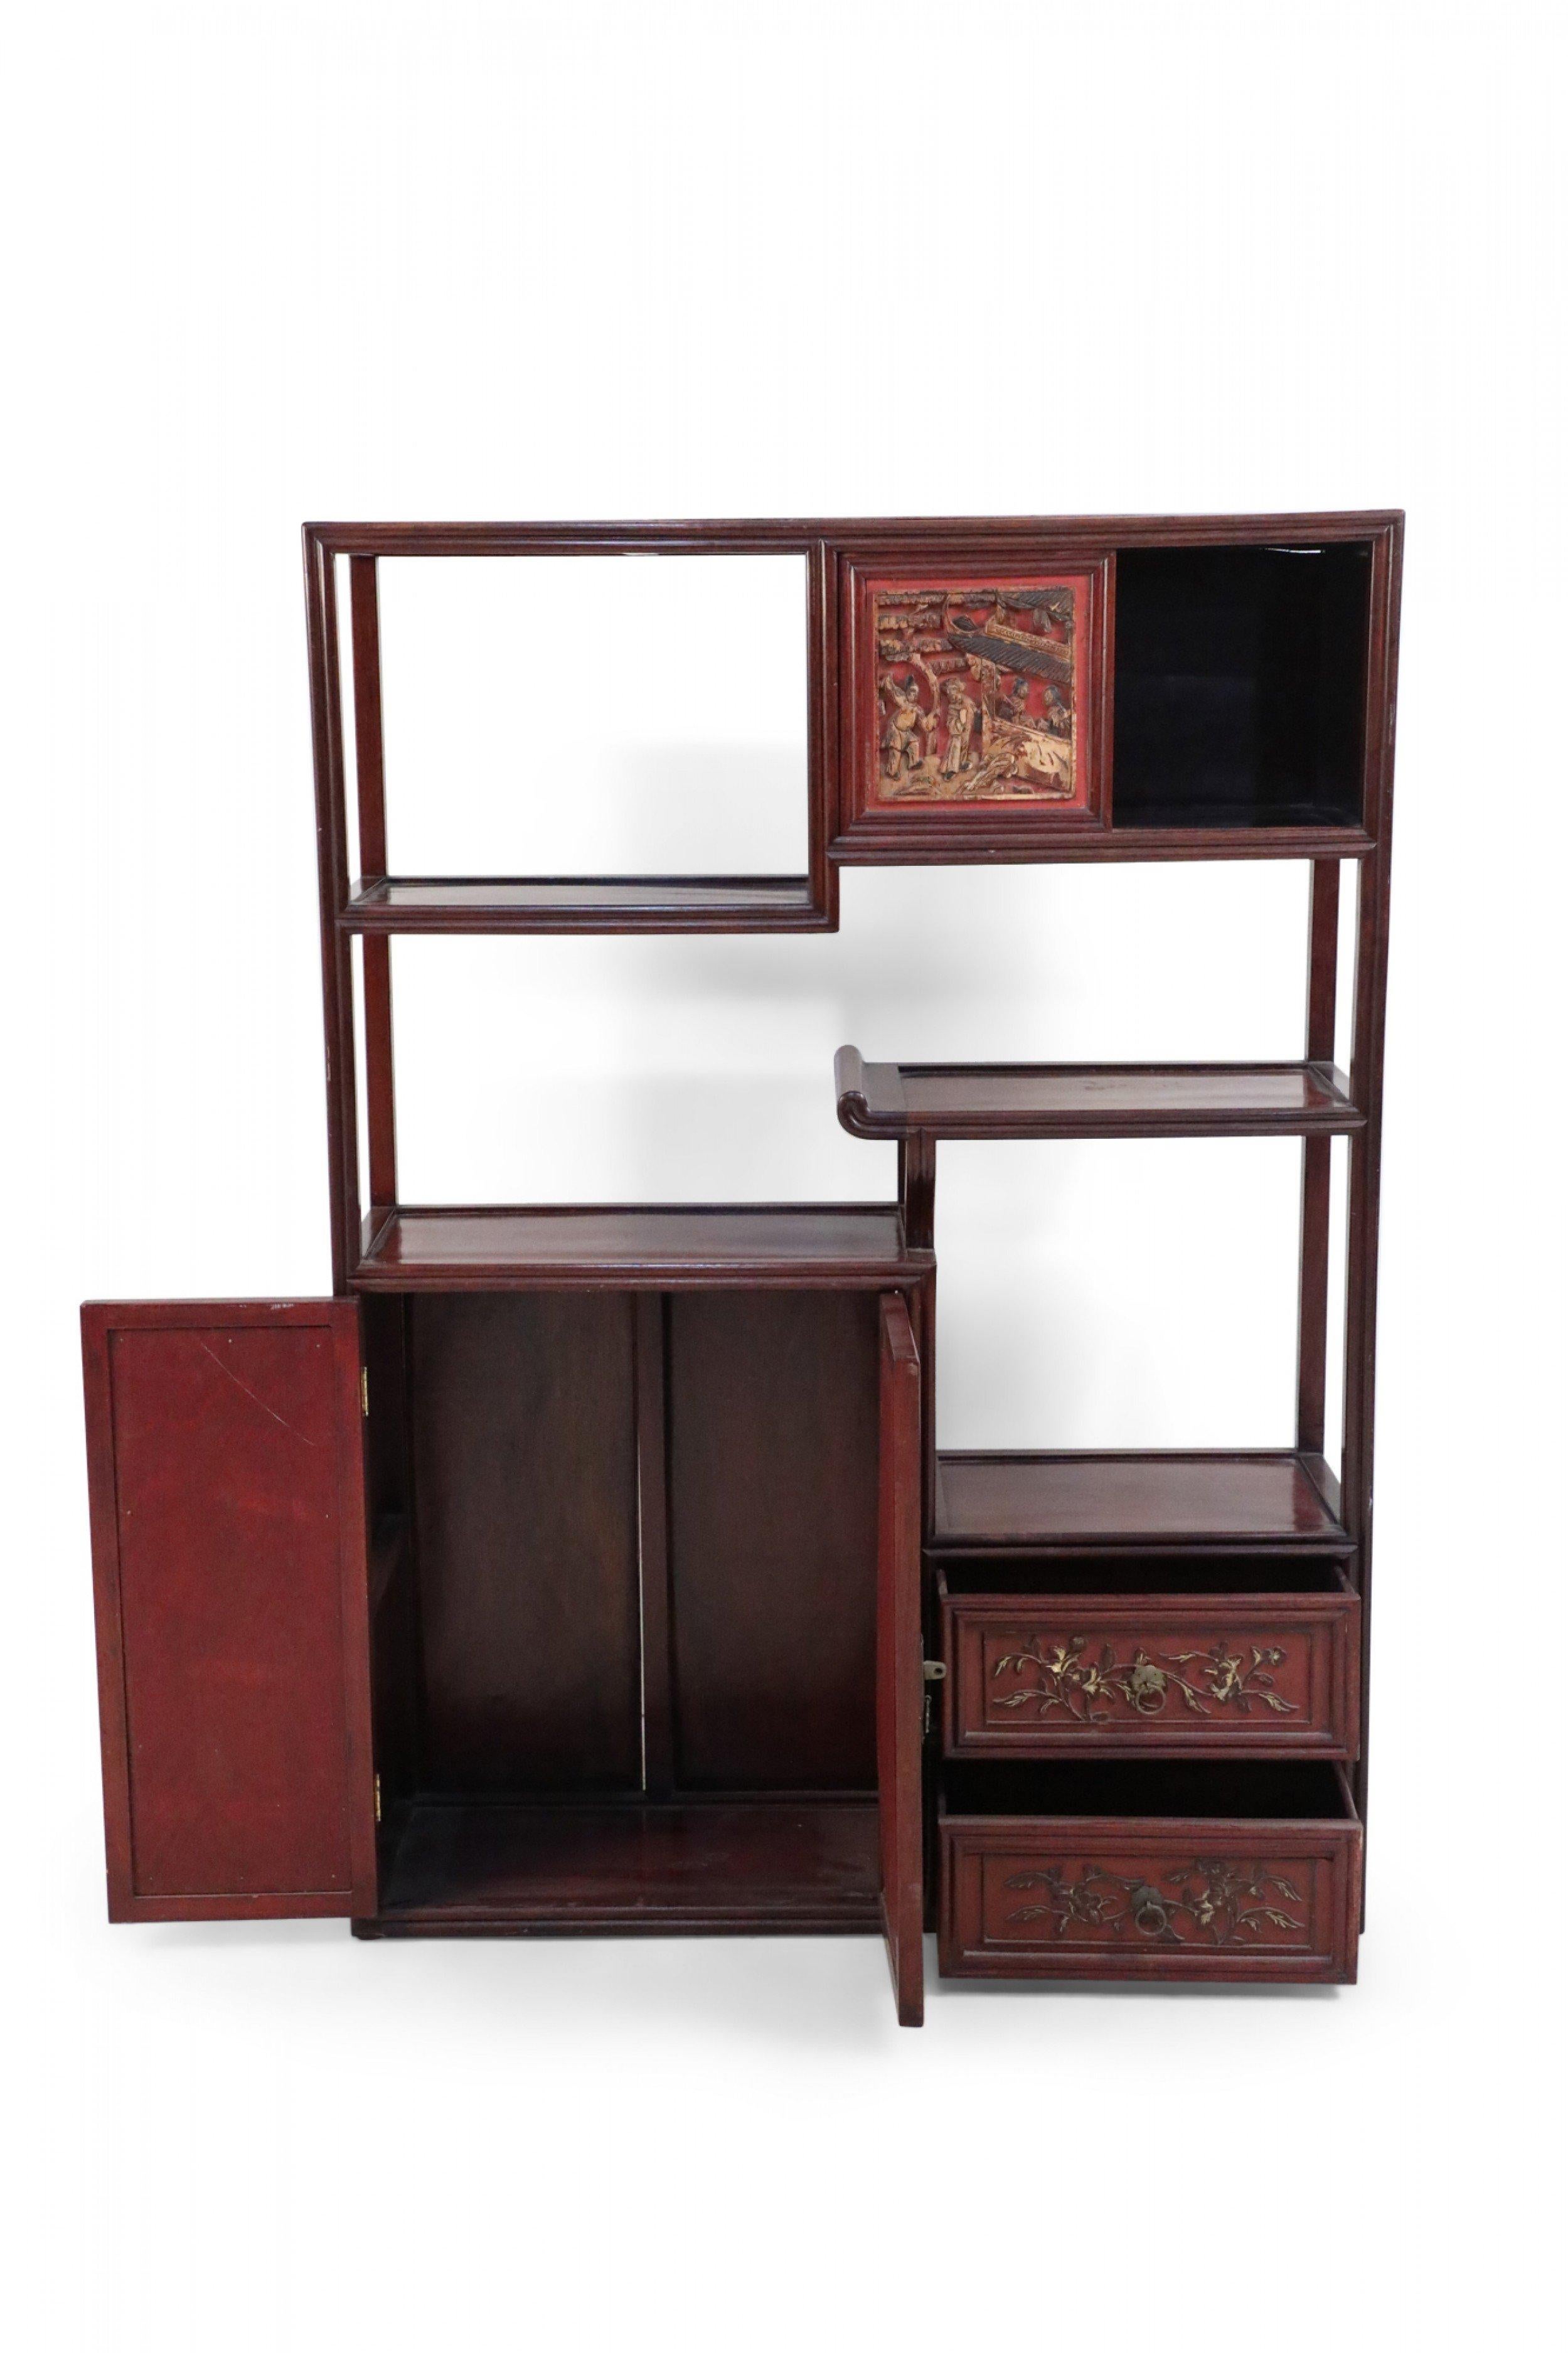 Chinese Bogu wooden etagere featuring open display shelving connecting ornately carved, red framed doors, two red drawers with golden foliage ornamentation and drawer pulls, and sliding doors, decorated in richly-depicted raised figurative scenes.